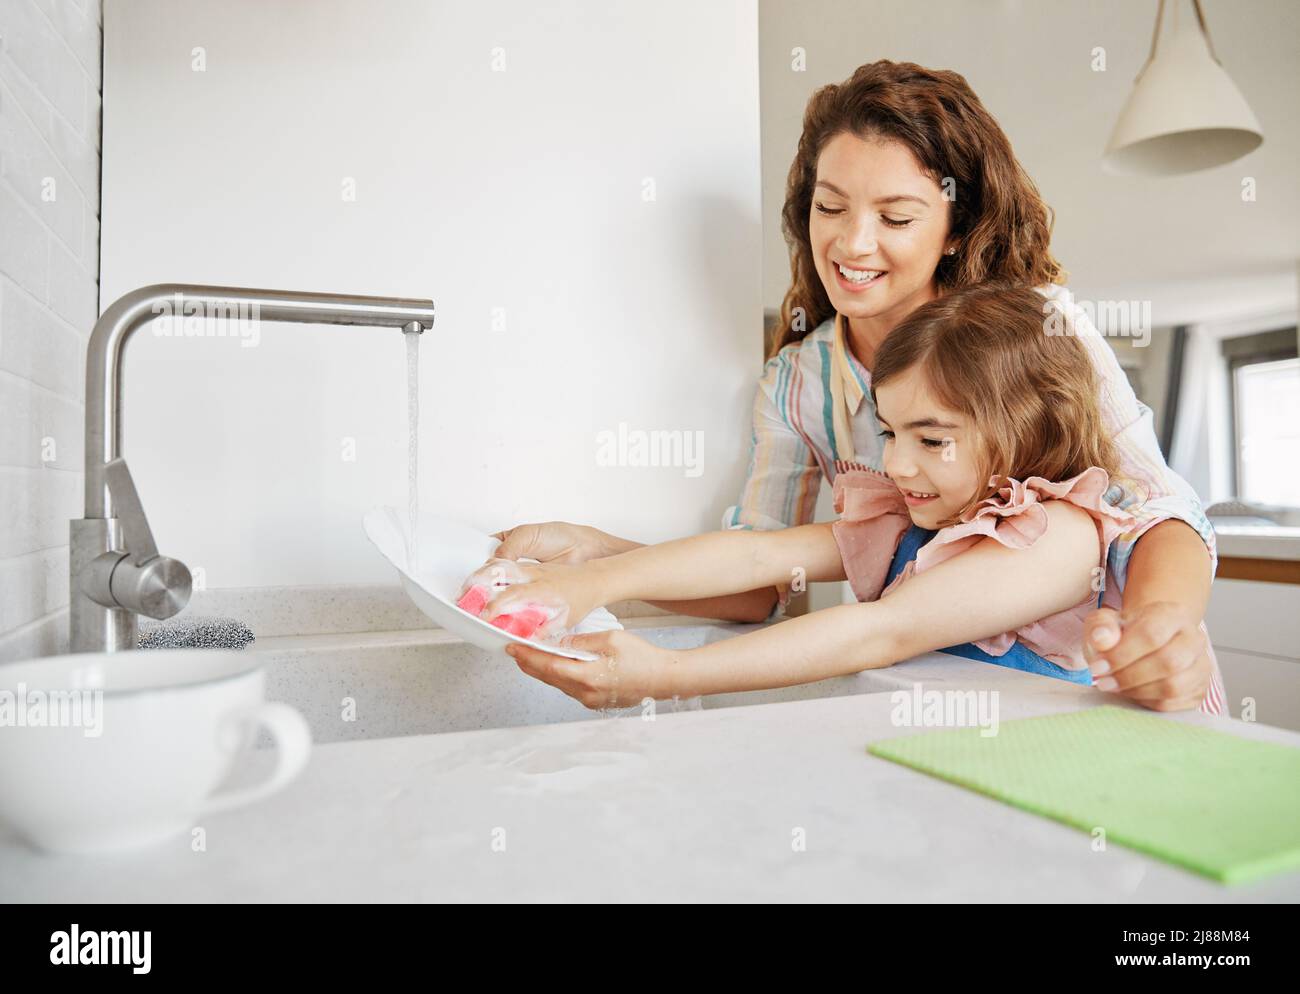 child kitchen dish home housework washing kid mother helping sink gir chore house water family Stock Photo